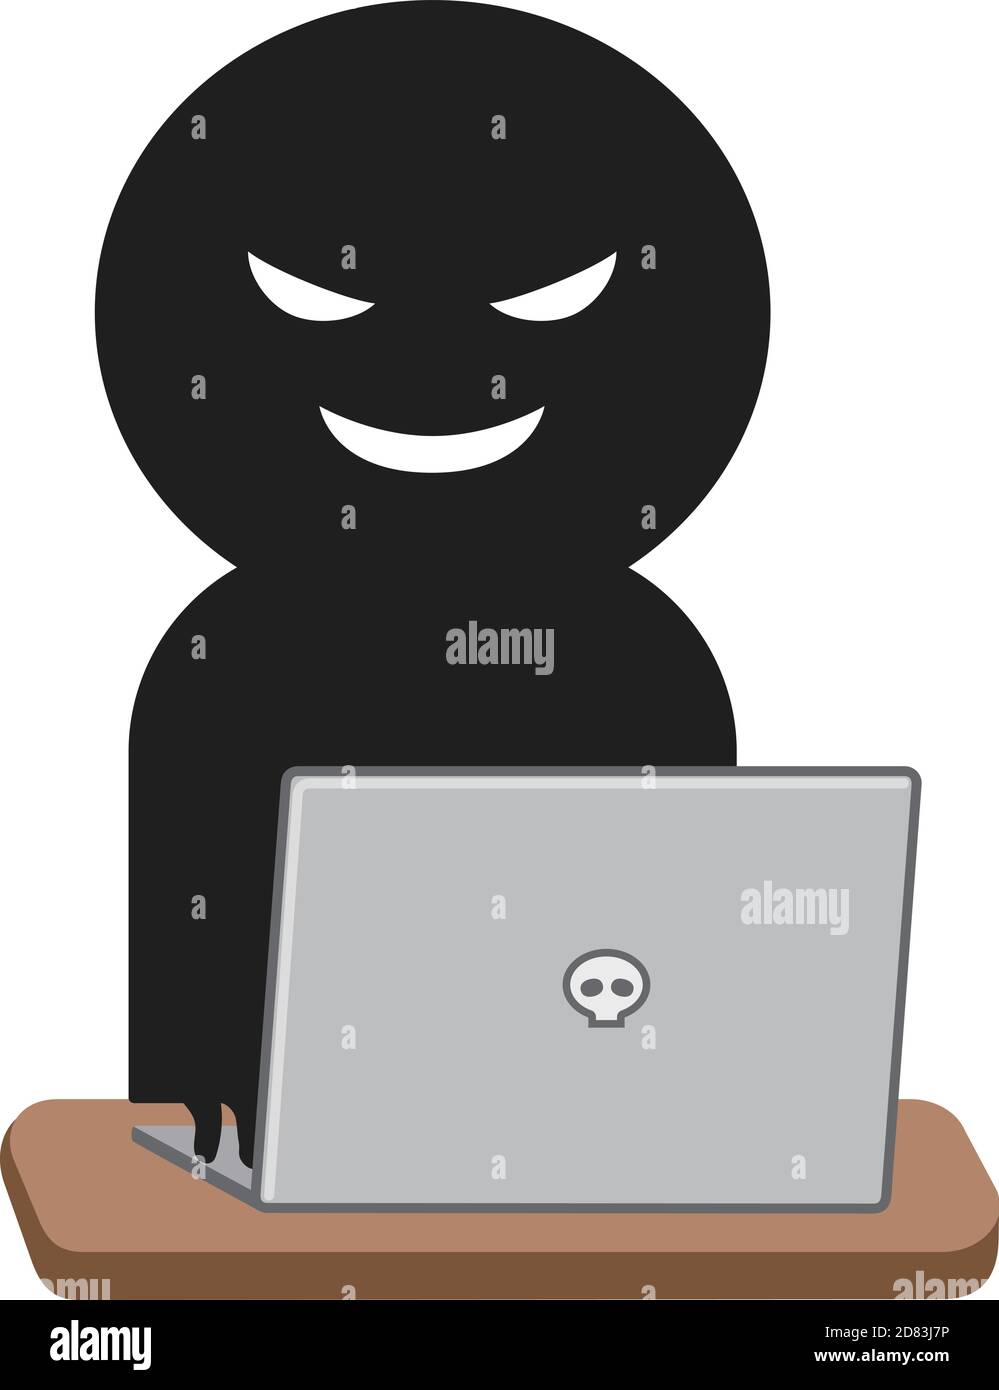 Anonymous human uses a laptop computer for stealing personal data and money. Vector illustration isolated on white background. Stock Vector